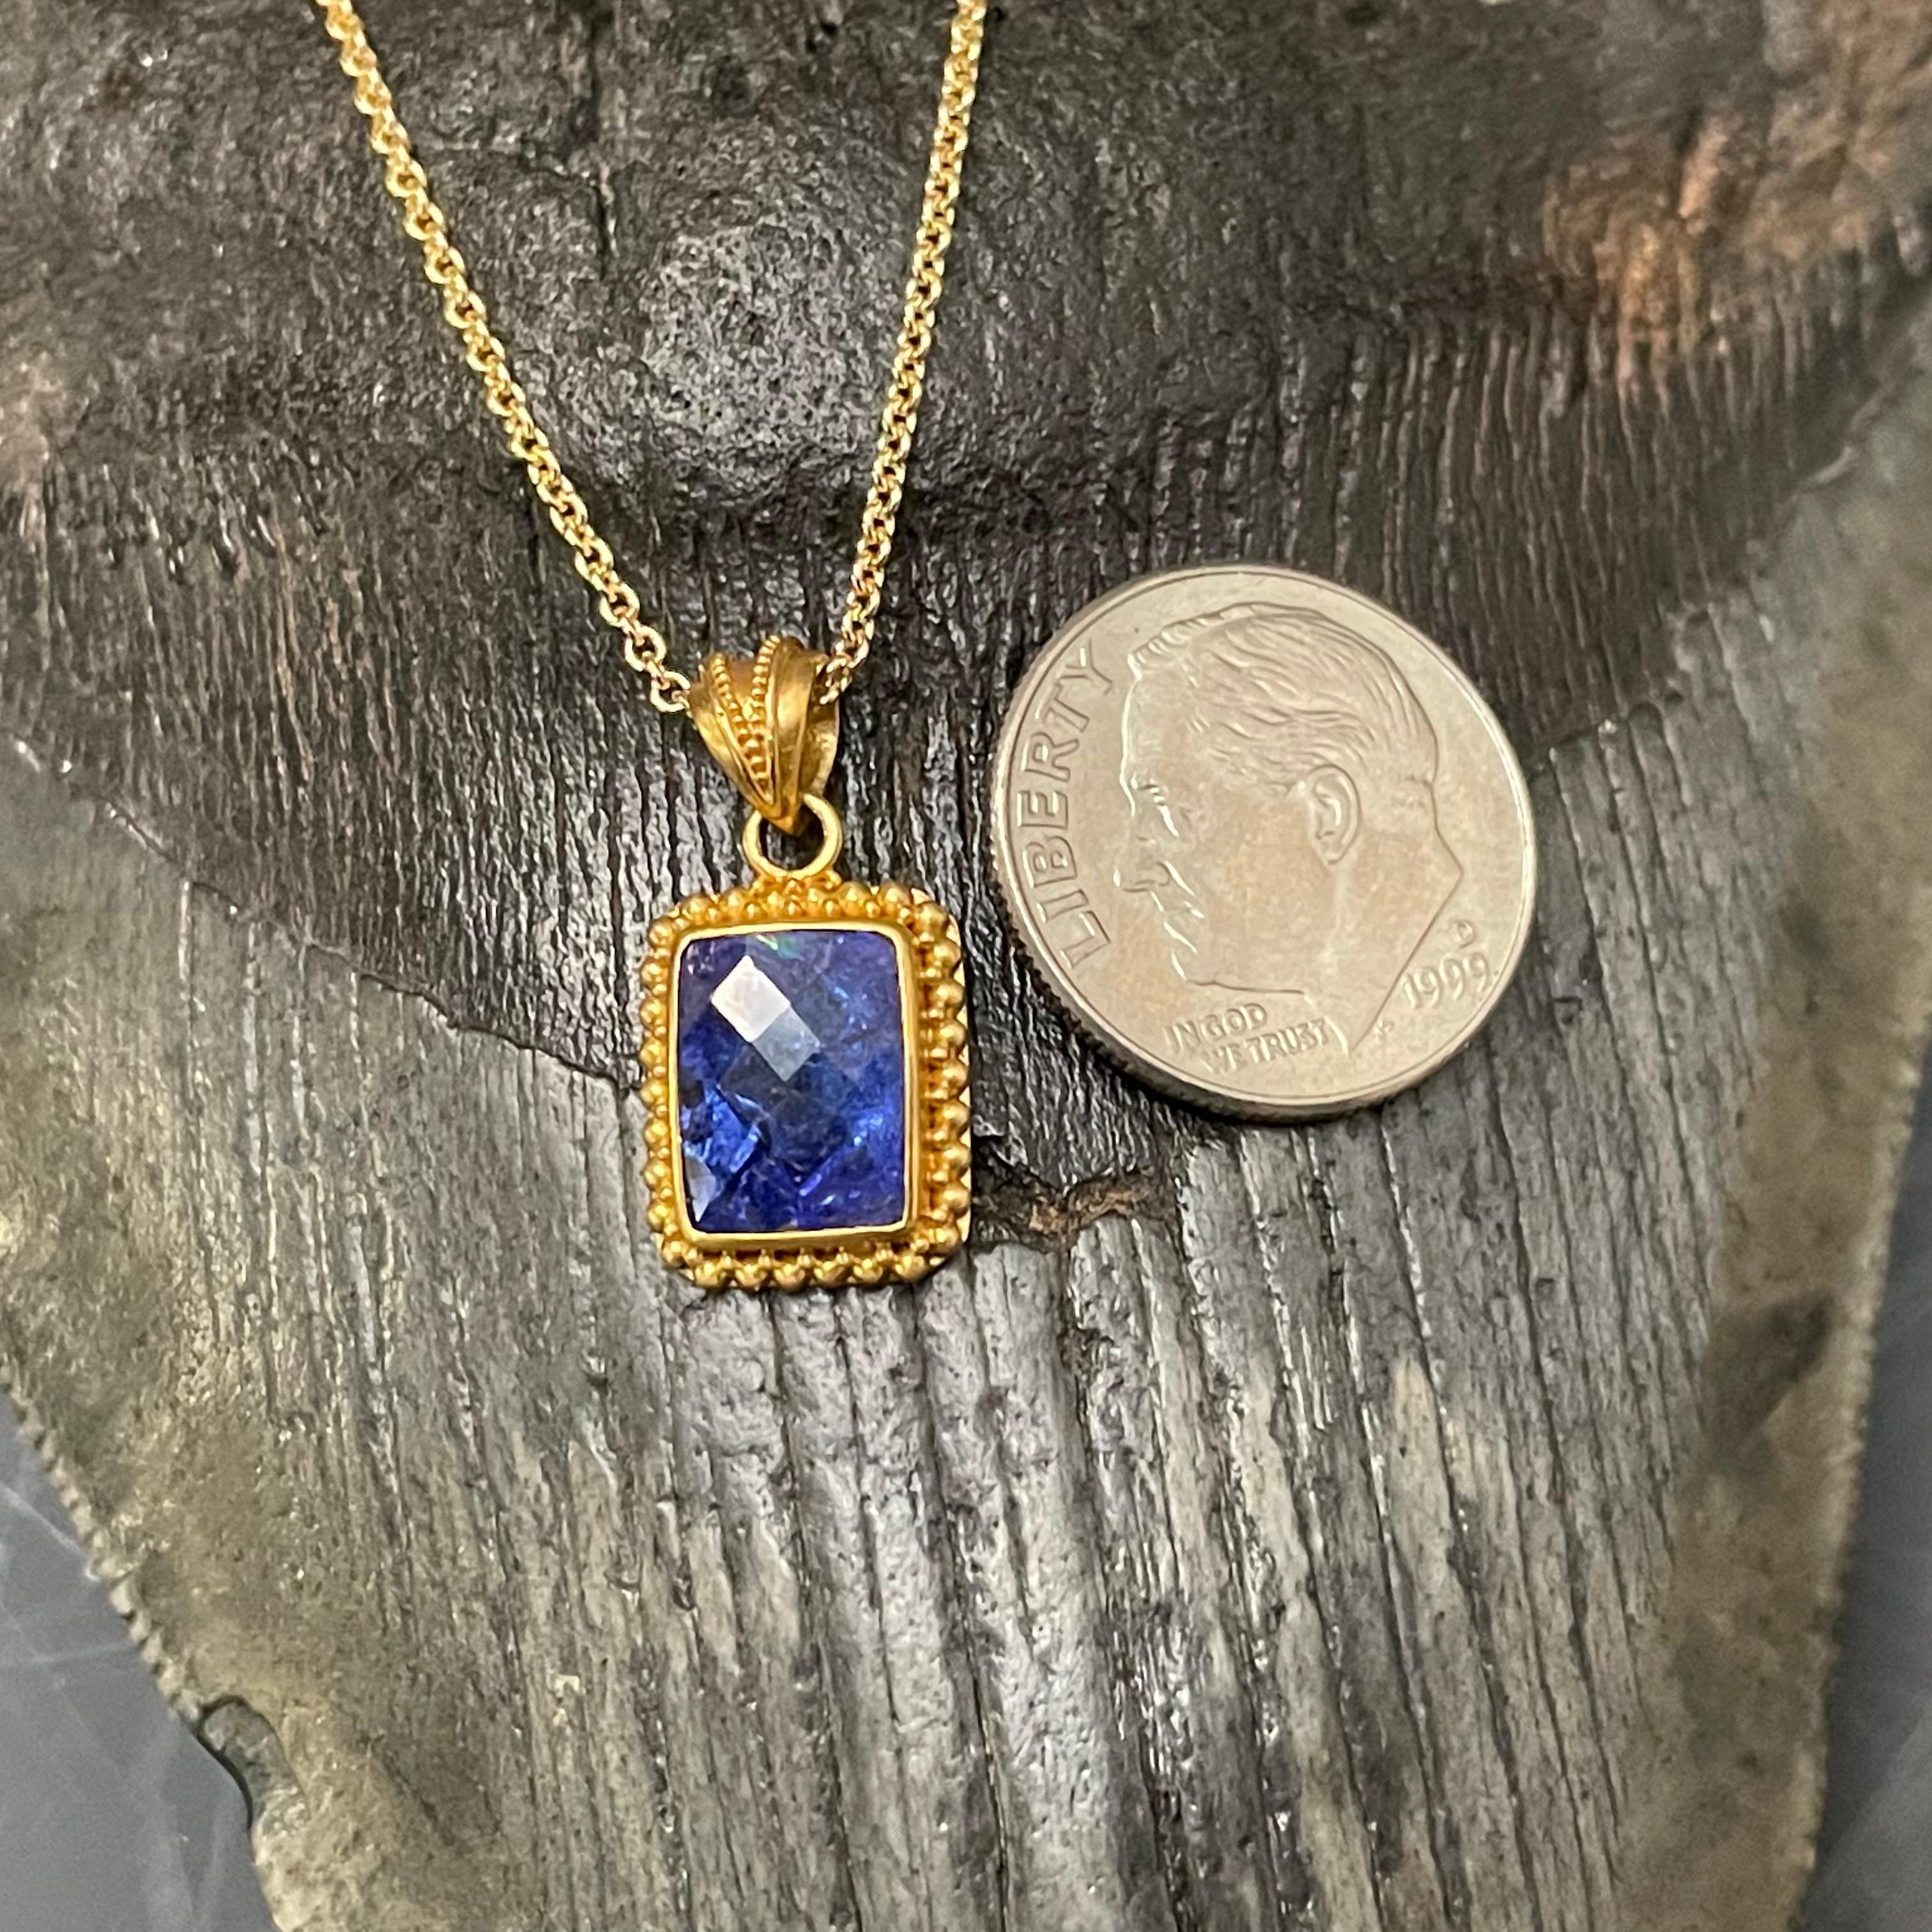 Steven Battelle 2.9 Carats Rose Cut Tanzanite 22K Gold Pendant 18 Inch 18K Chain In New Condition For Sale In Soquel, CA